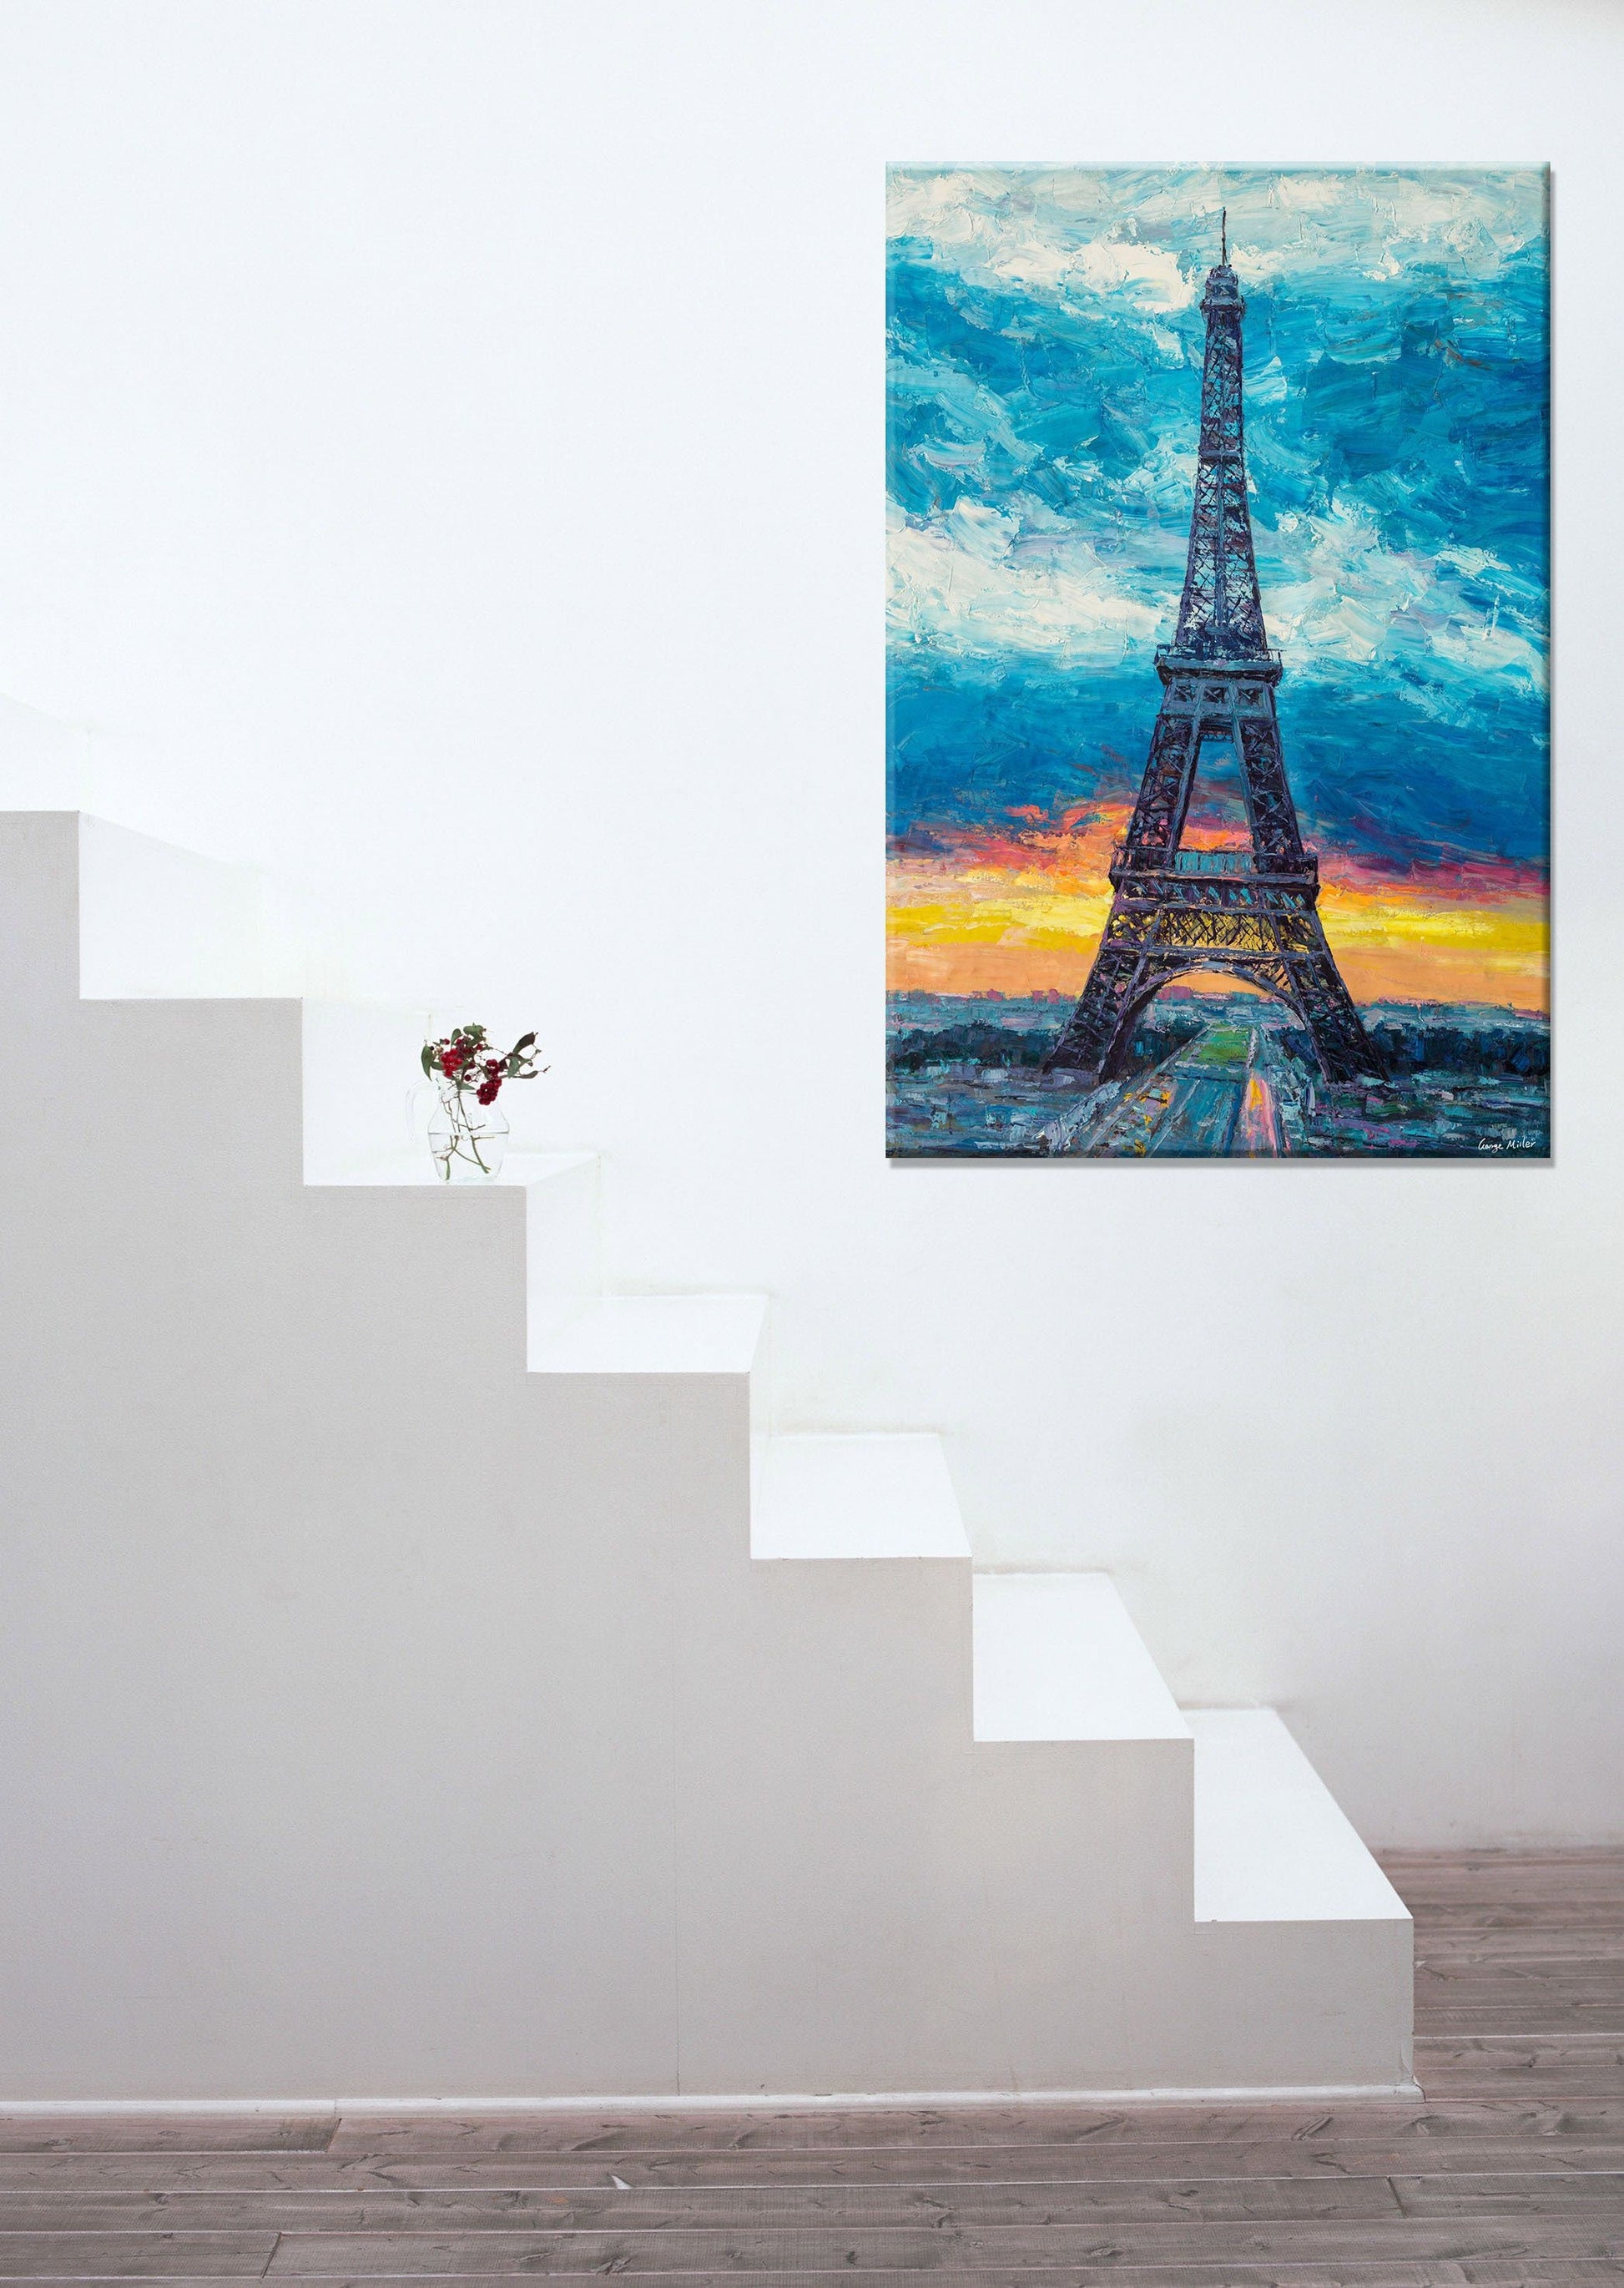 Original Landscape Painting Paris Eiffel Tower at Dawn, Large Wall Art Cityscape, Modern Art, Abstract Canvas Painting, Large Oil Painting